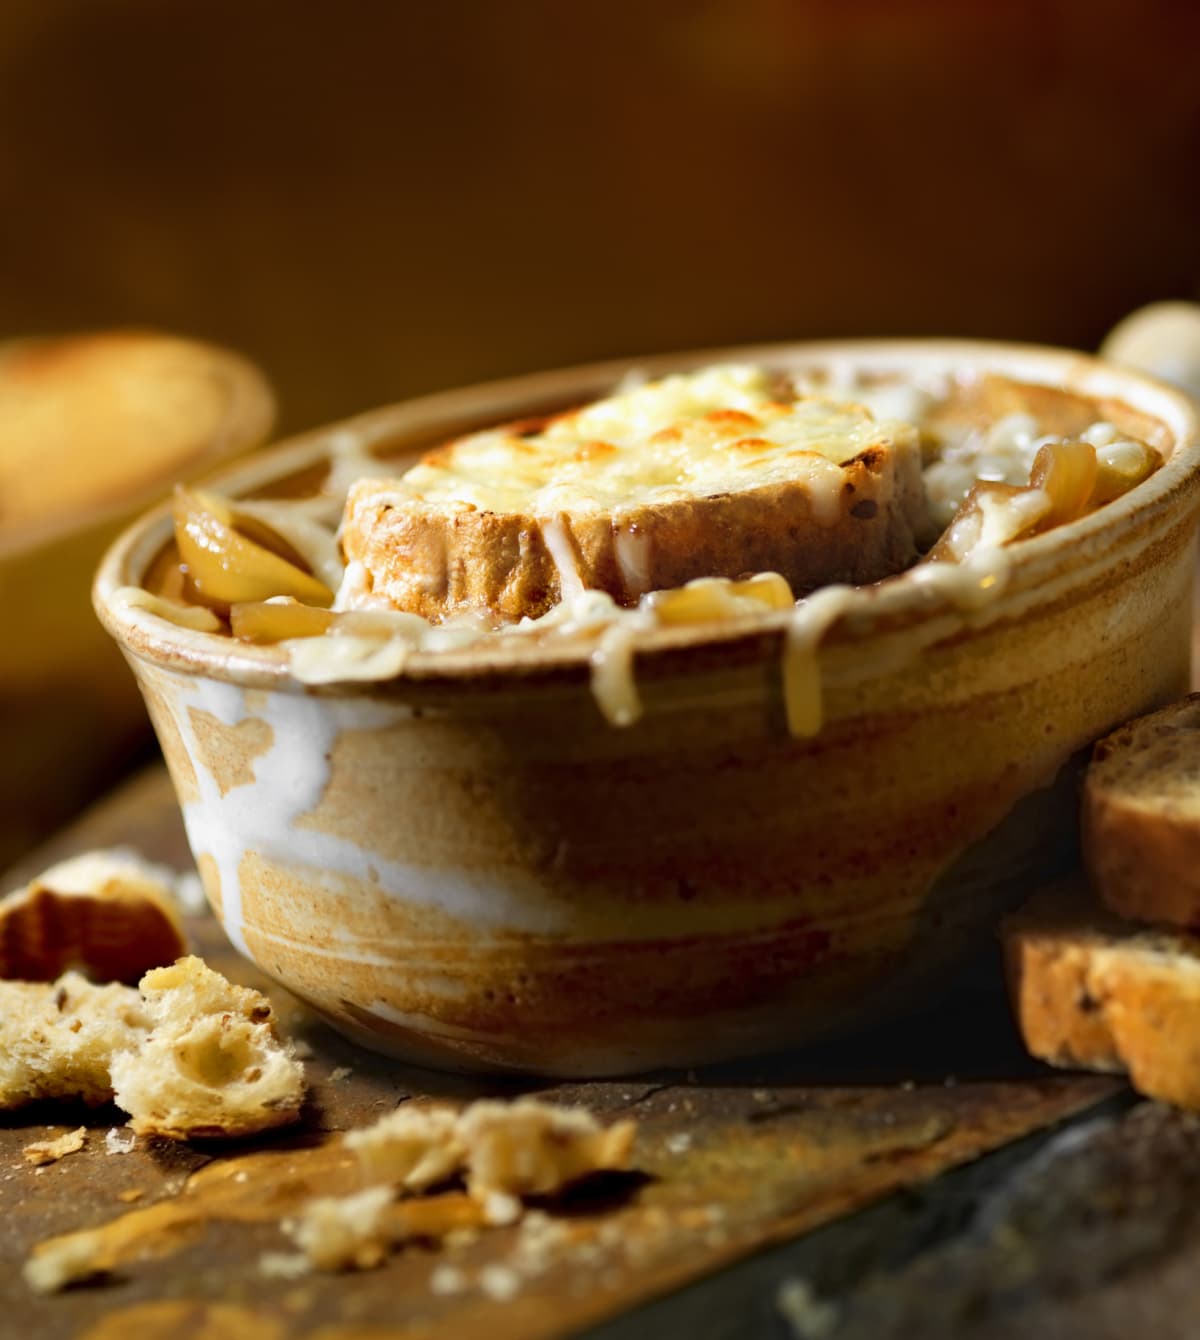 Onion Soup with toasted bread -Photographed on Hasselblad H1-22mb Camera